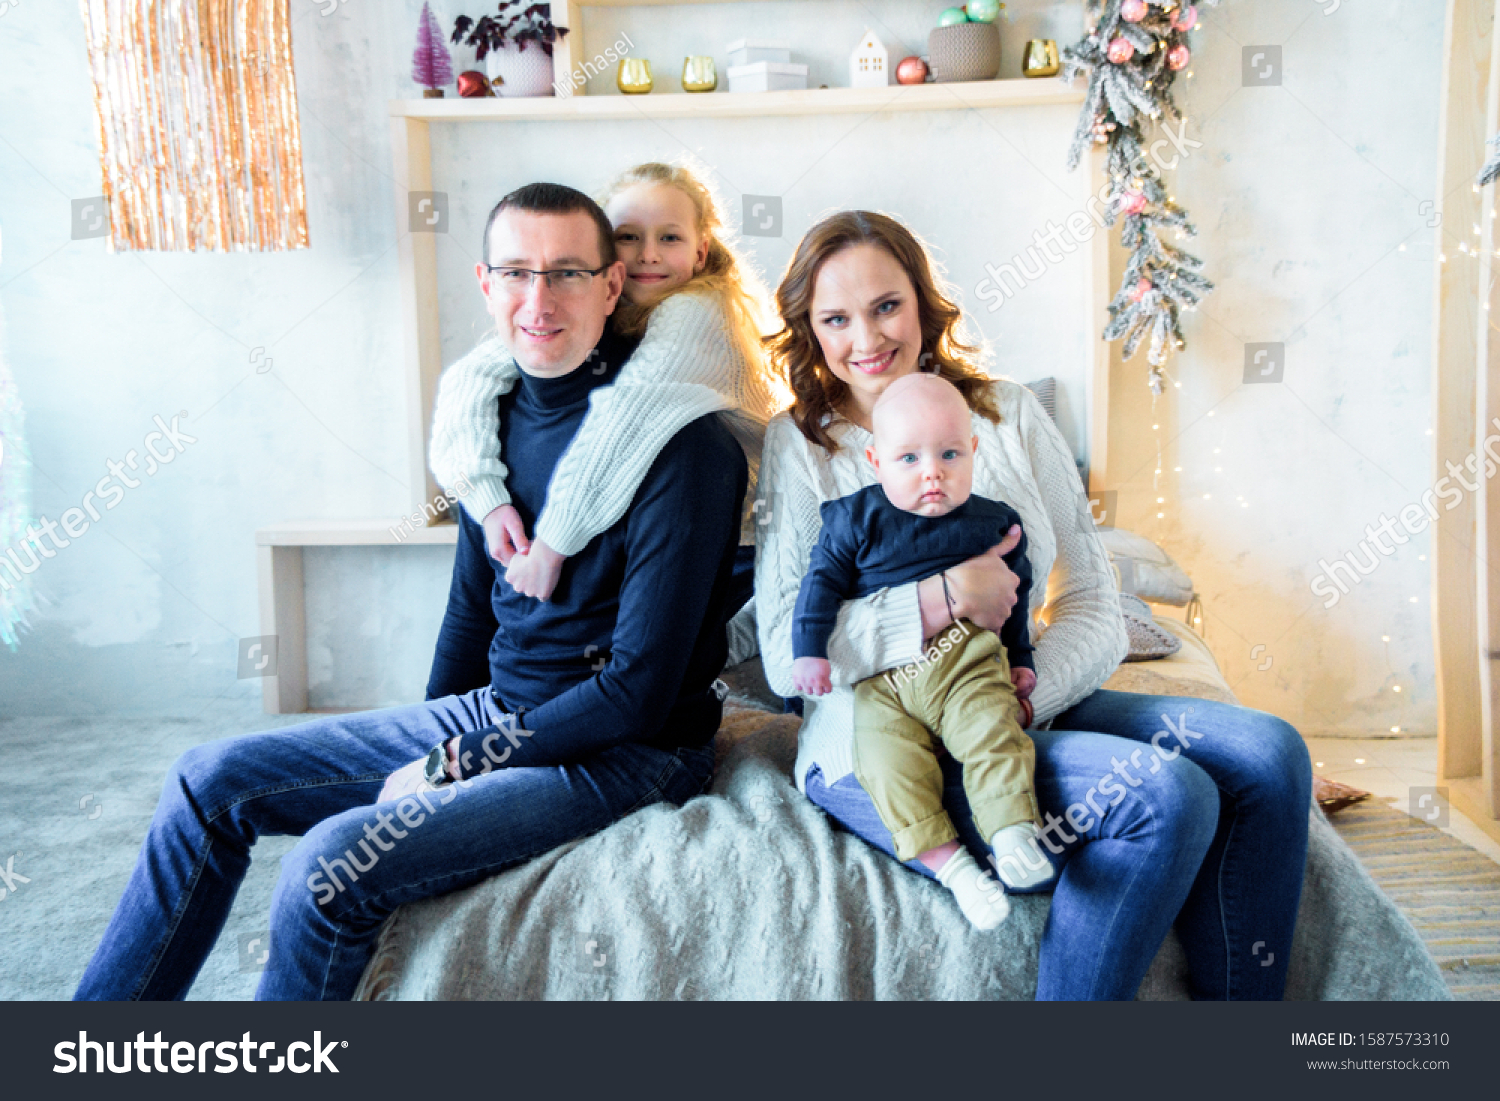 Happy mom and dad, sister and little brother on the bed in a large bright bedroom. Christmas decor and lights. Big happy family. The concept of parental love and parenting. #1587573310